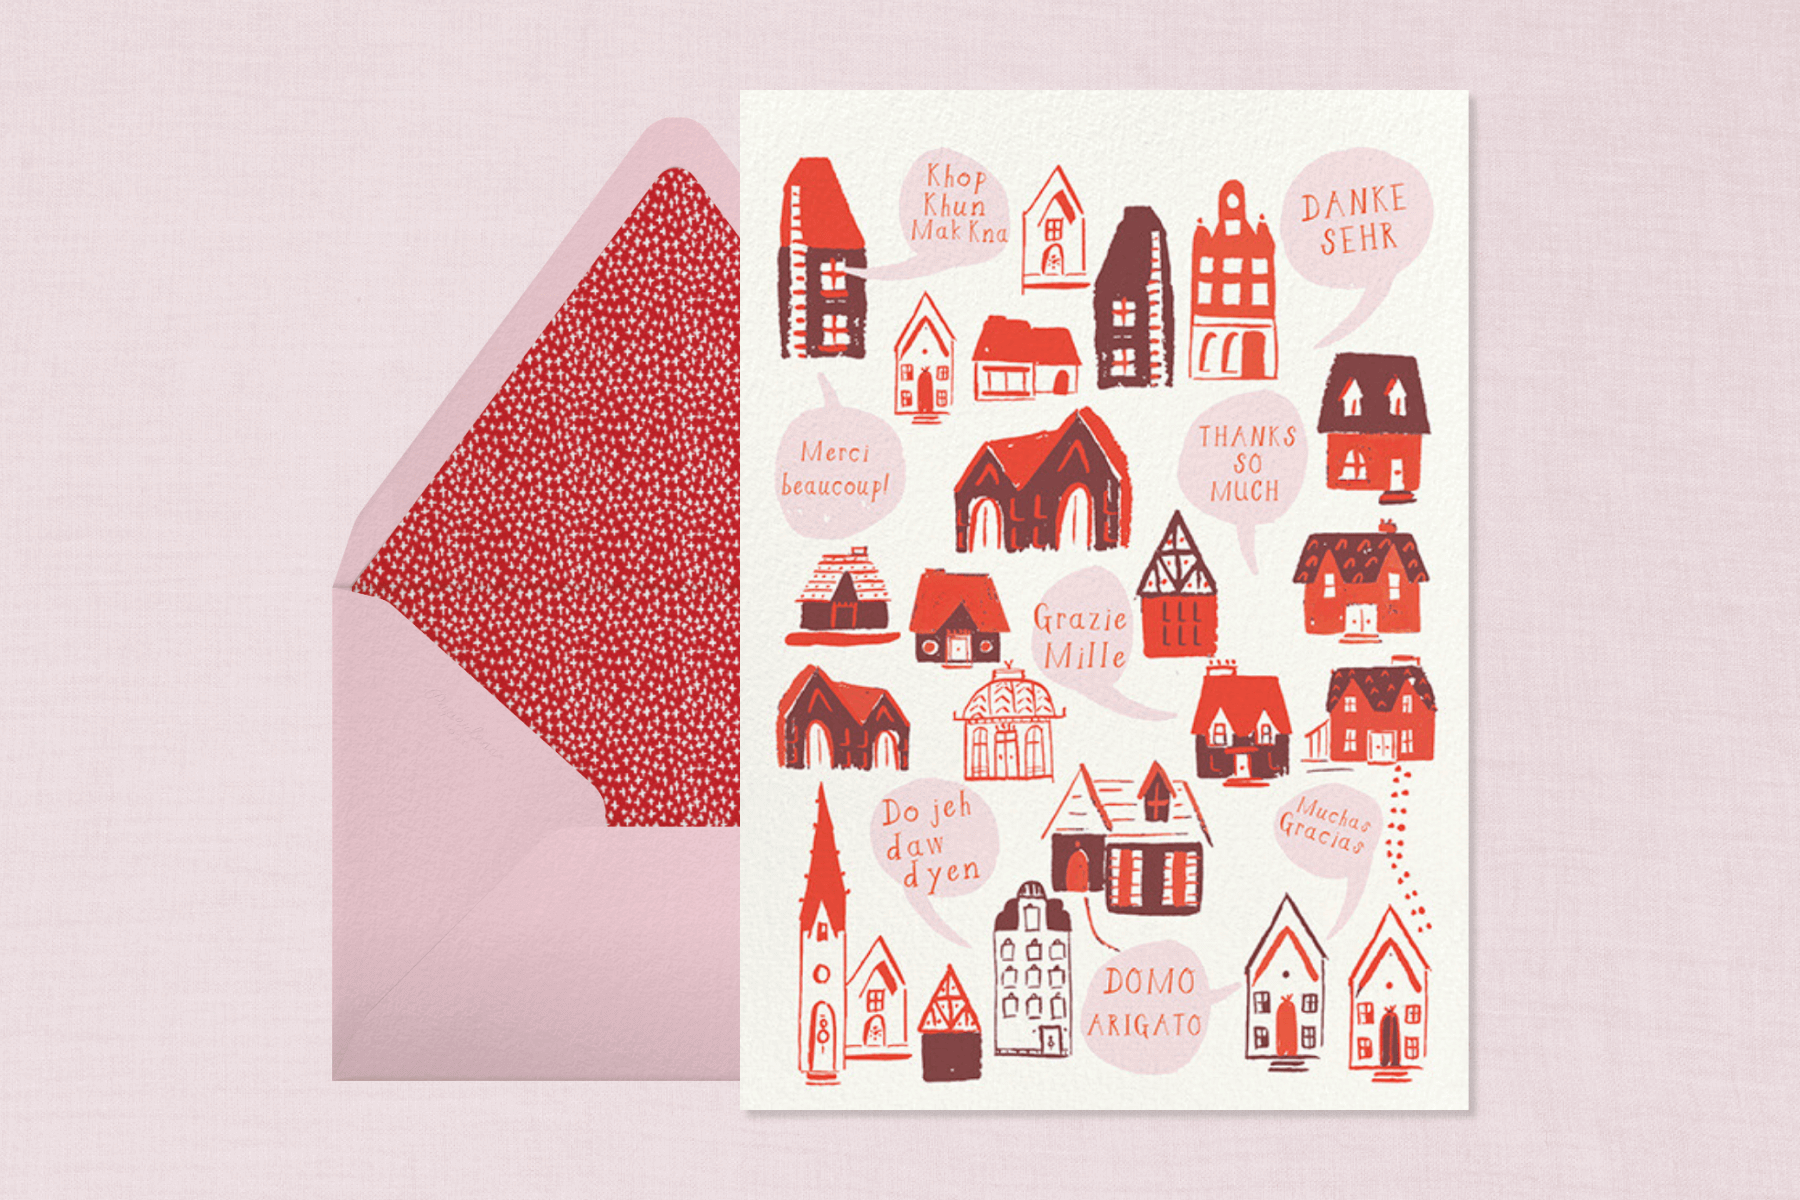 A thank you card with small red paintings of various styles of homes, and words of gratitude in various languages beside a pink envelope with red and white polka dot liner.